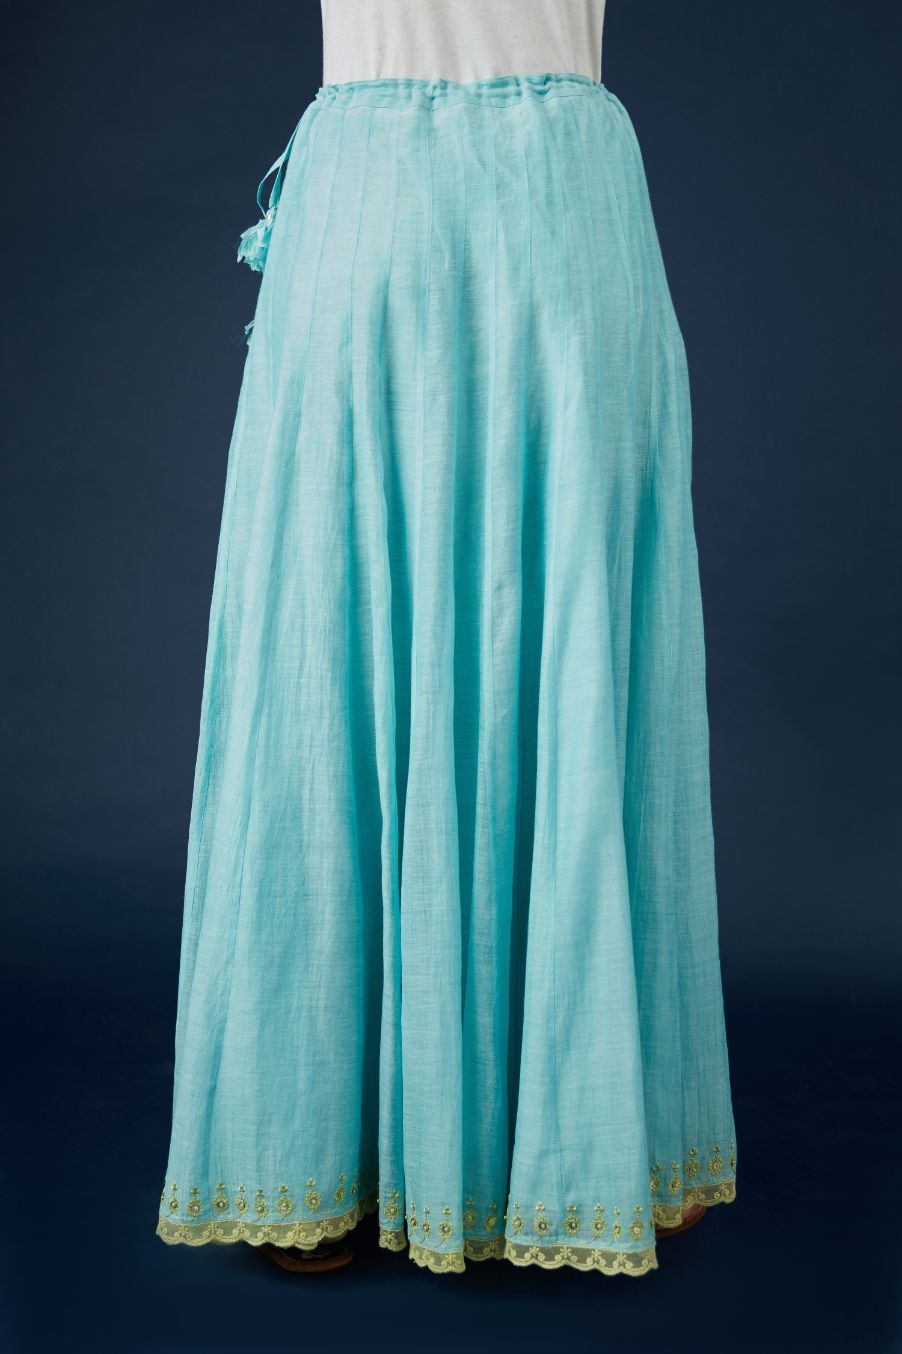 Aqua blue cotton Chanderi multi panelled skirt with lace, embroidery and sequin hand work detailing at edge. (Skirt)